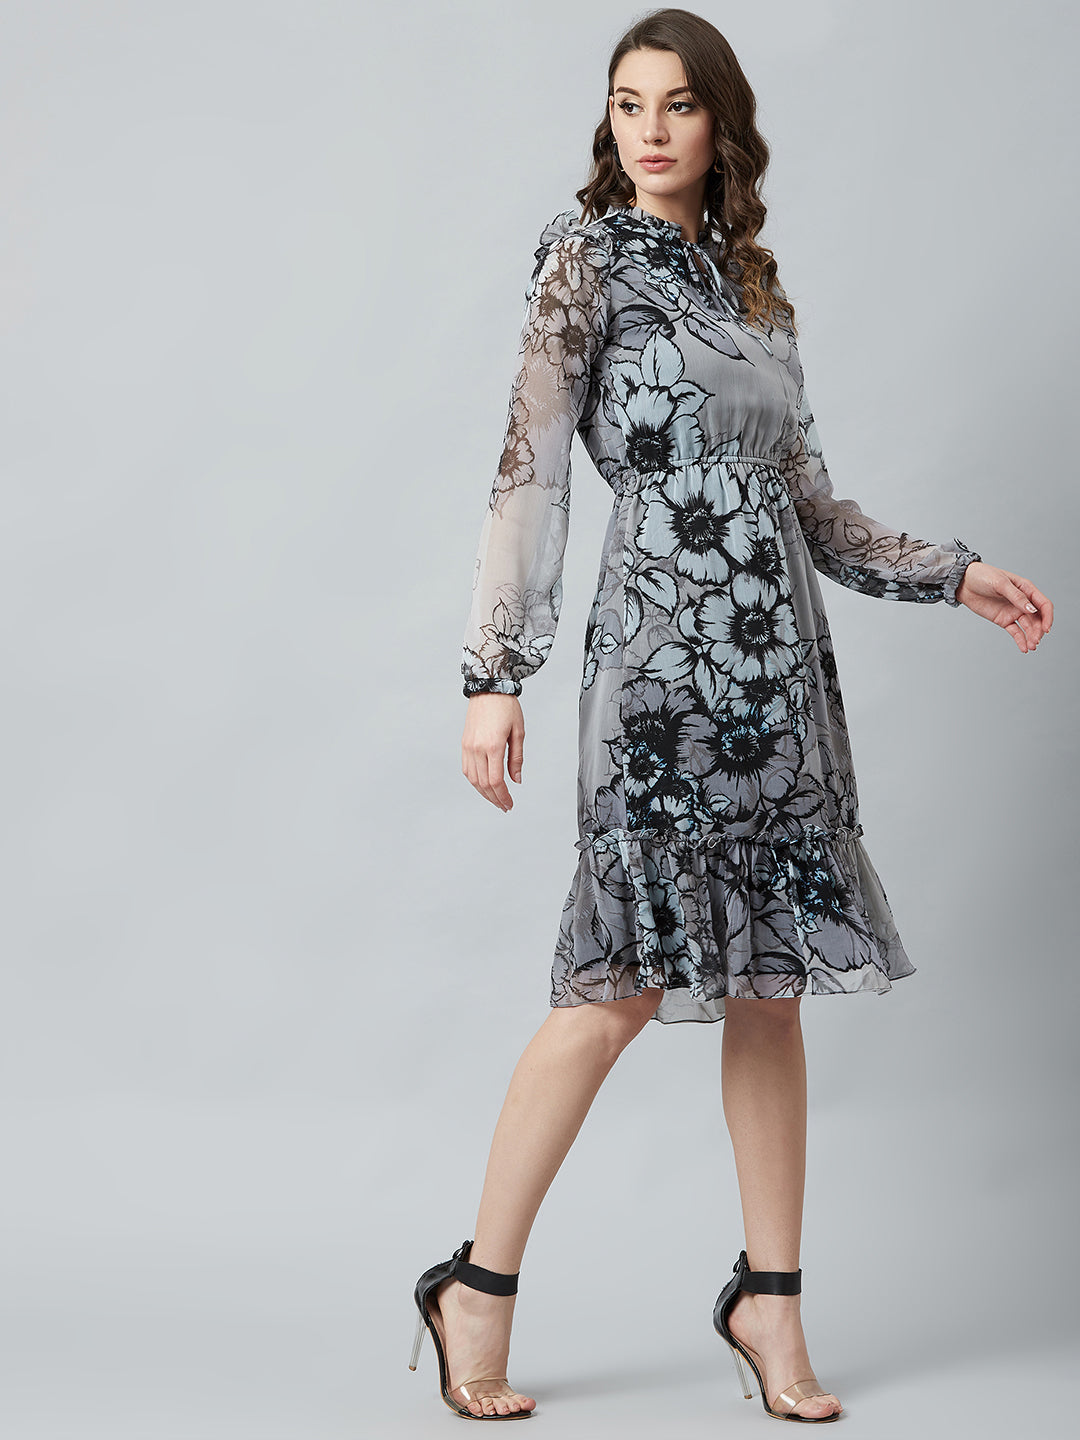 Athena Grey Floral Printed Fit and Flare Dress - Athena Lifestyle